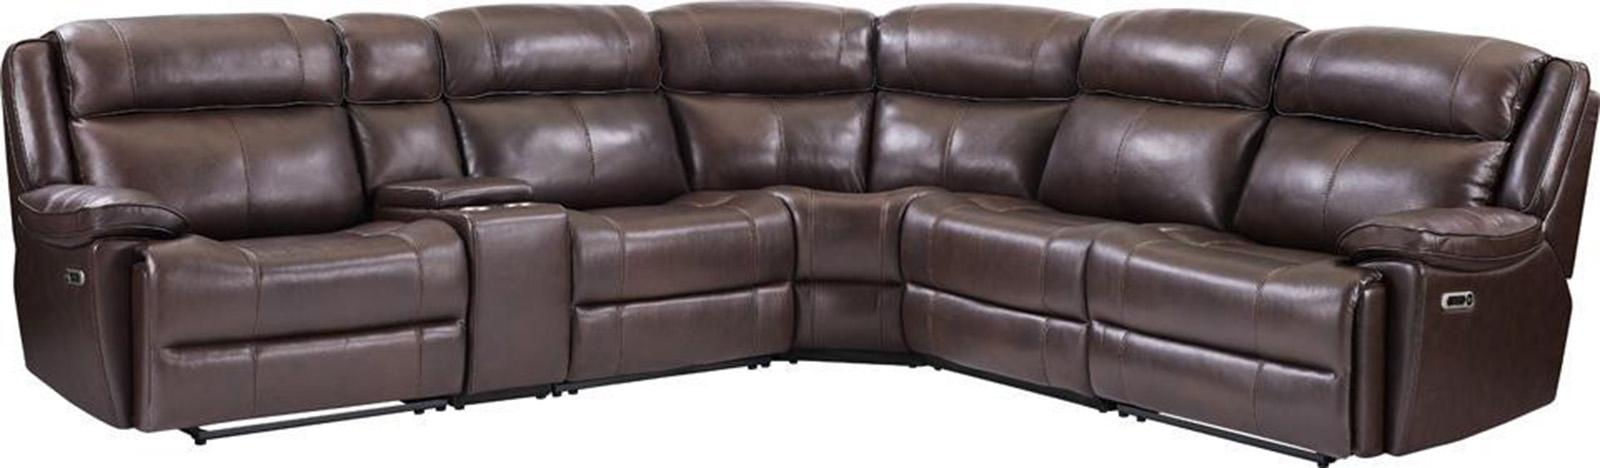 Parker House Furniture Eclipse Corner Wedge in Florence Brown